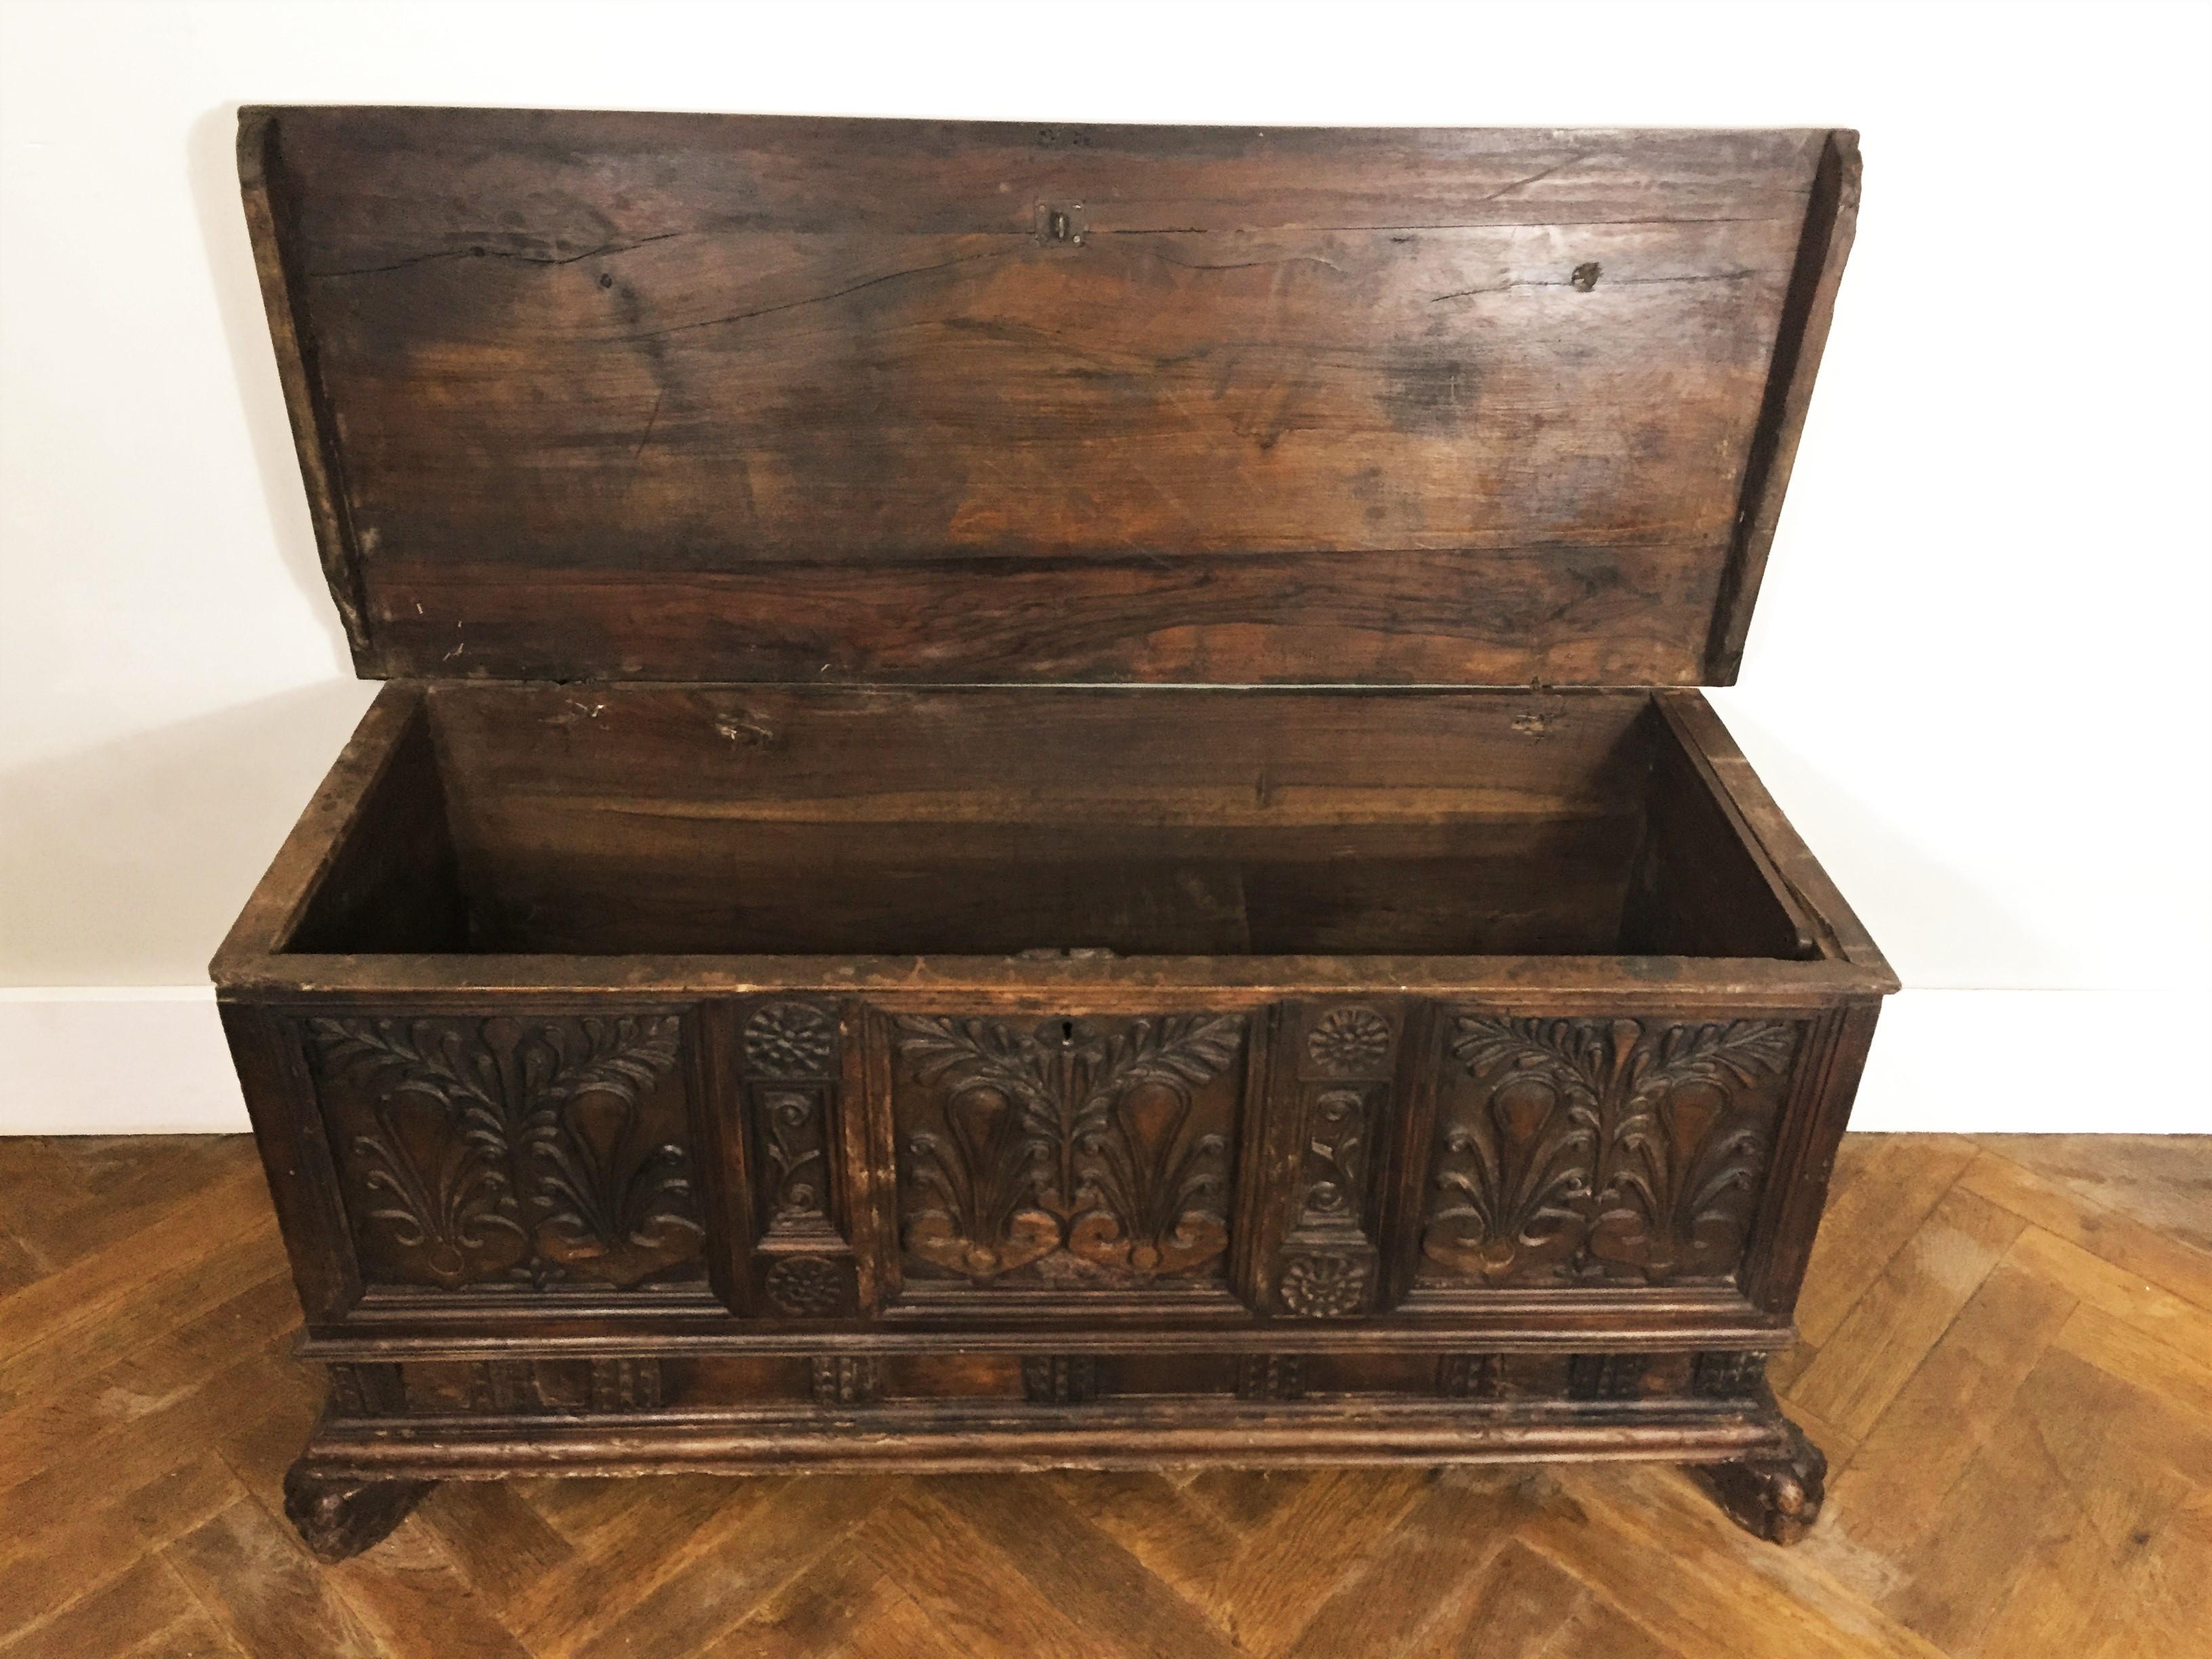 French Early 17th Century Renaissance Chest in Walnut with Lion Feet